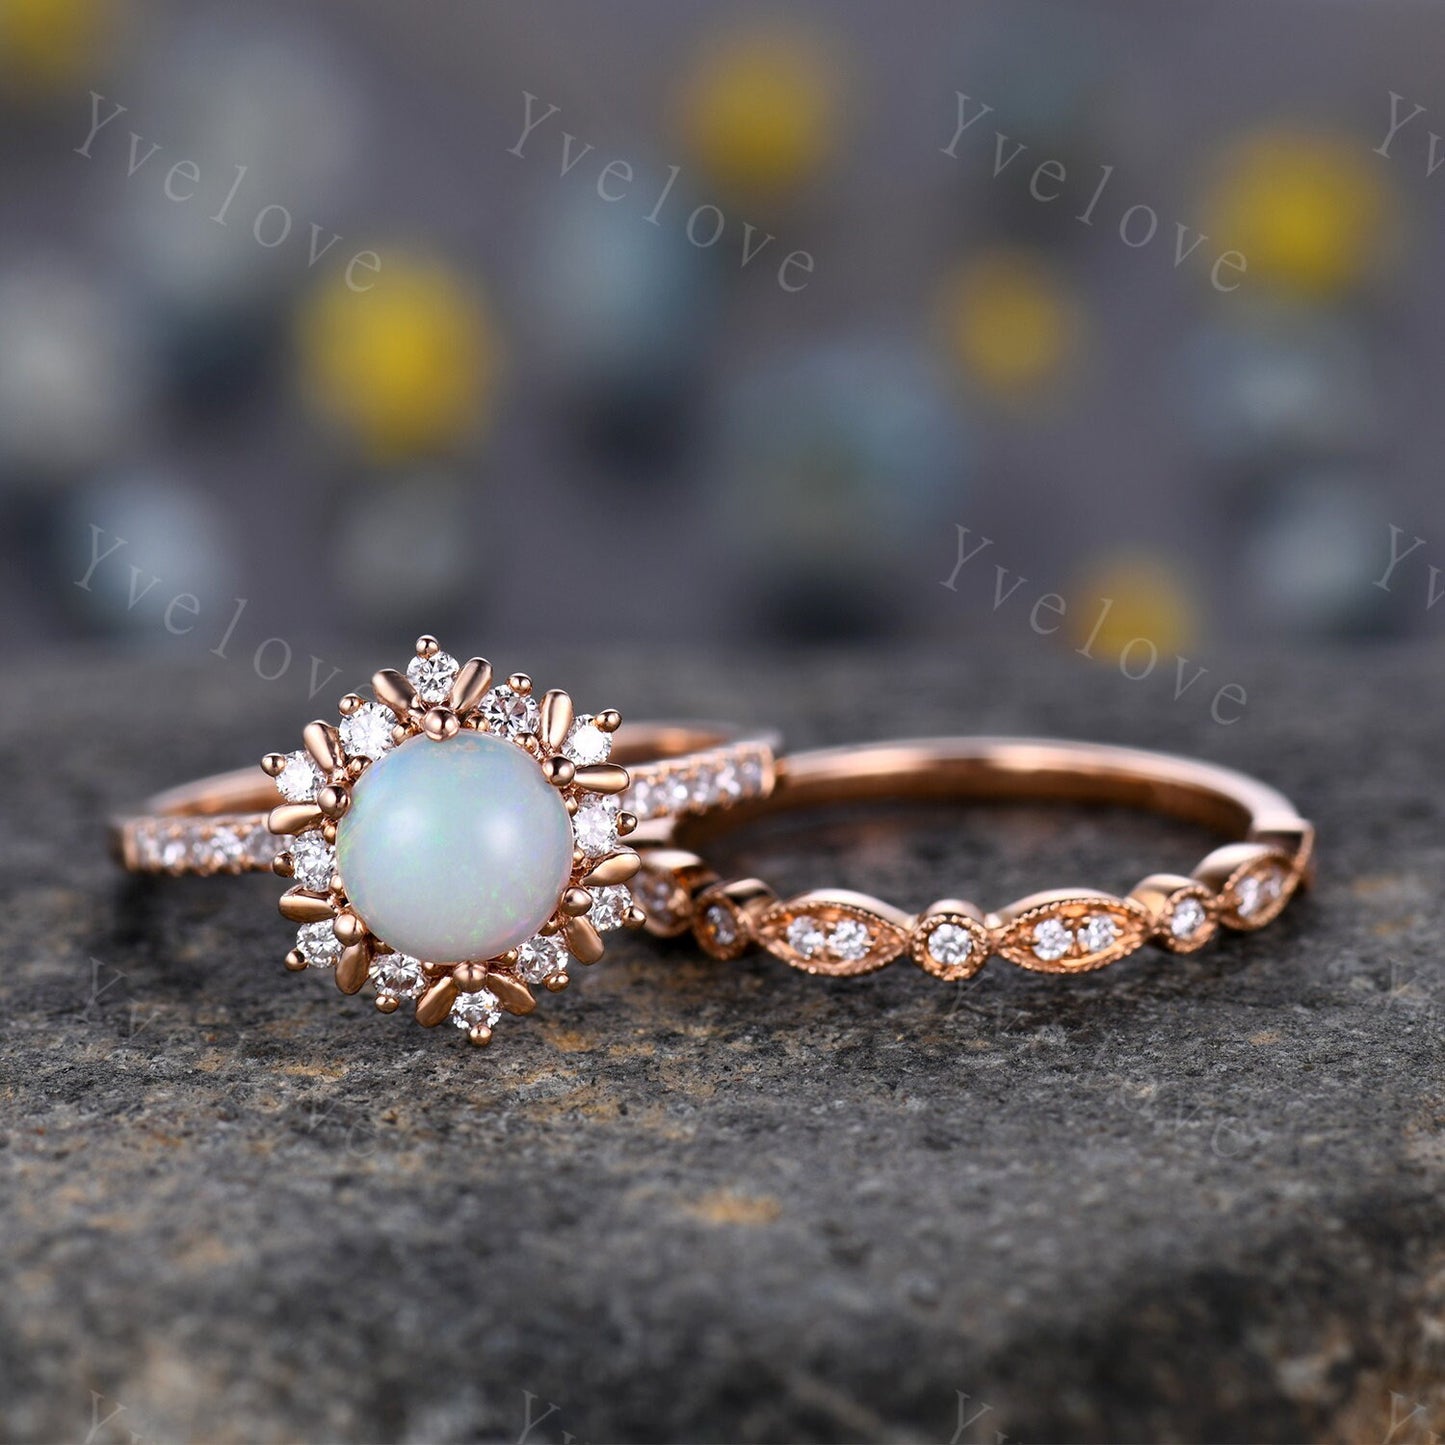 Unique Natural Opal Engagement Ring Set,White Opal Floral Ring,Diamond Wedding Band,Stacking Bridal Set For Women,Promise Anniversary Gift